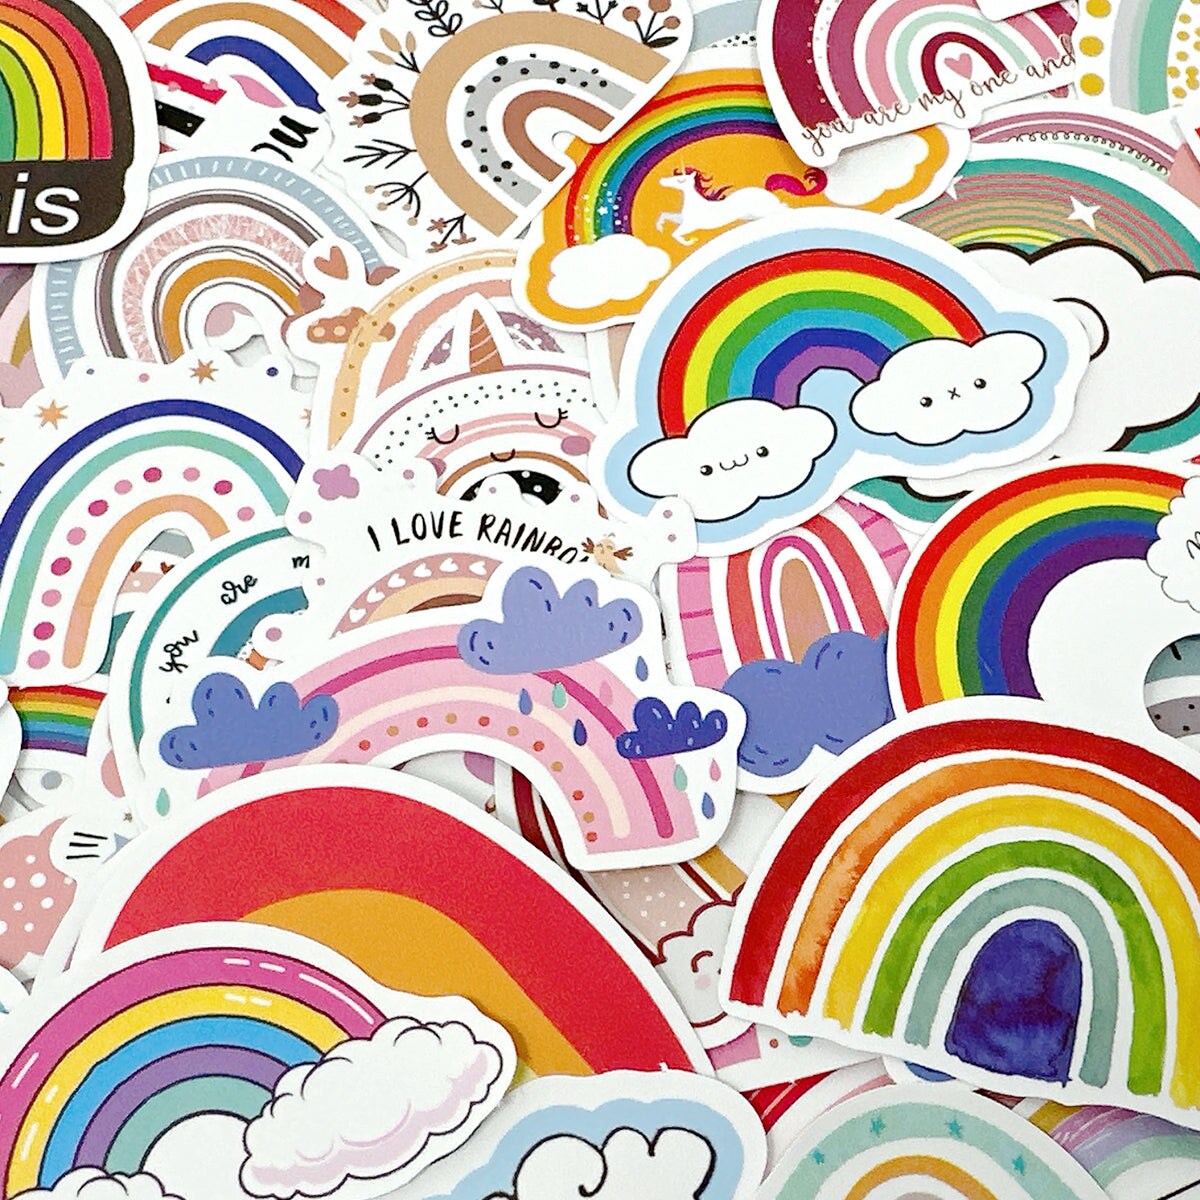 Wrapables Waterproof Vinyl Stickers for Water Bottles, Laptop, Phones,  Skateboards, Decals for Teens, 100pcs, Abstract 